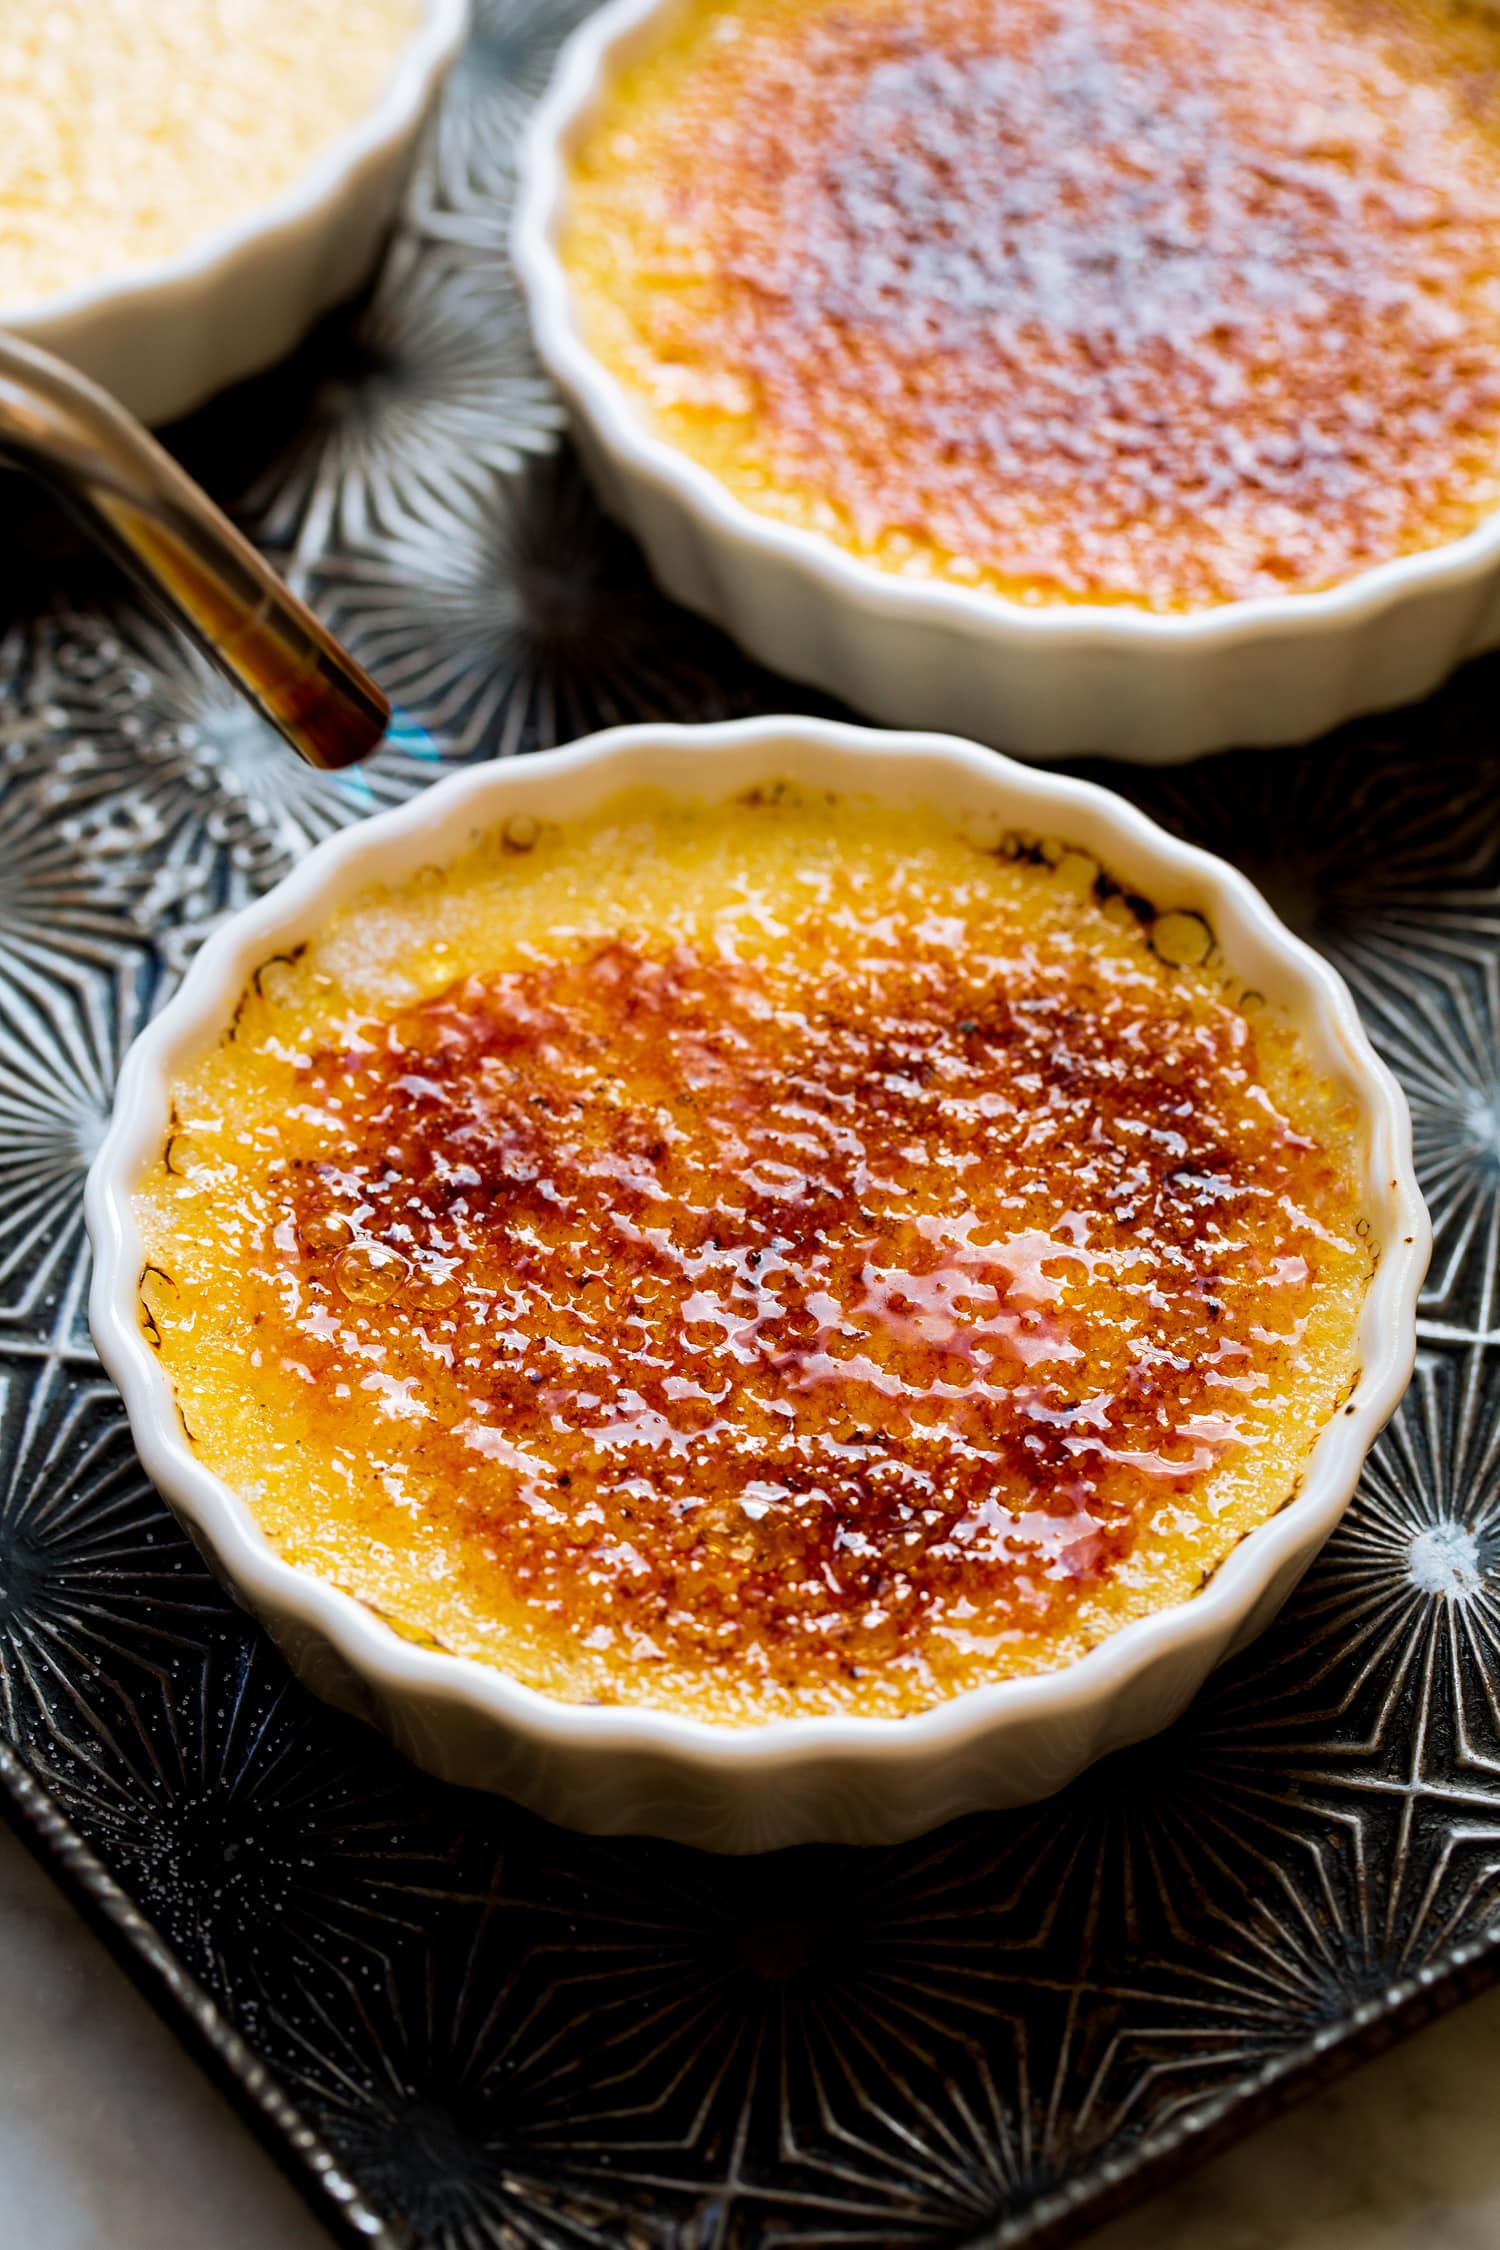 Creme brûlée sugar being caramelized with a torch.